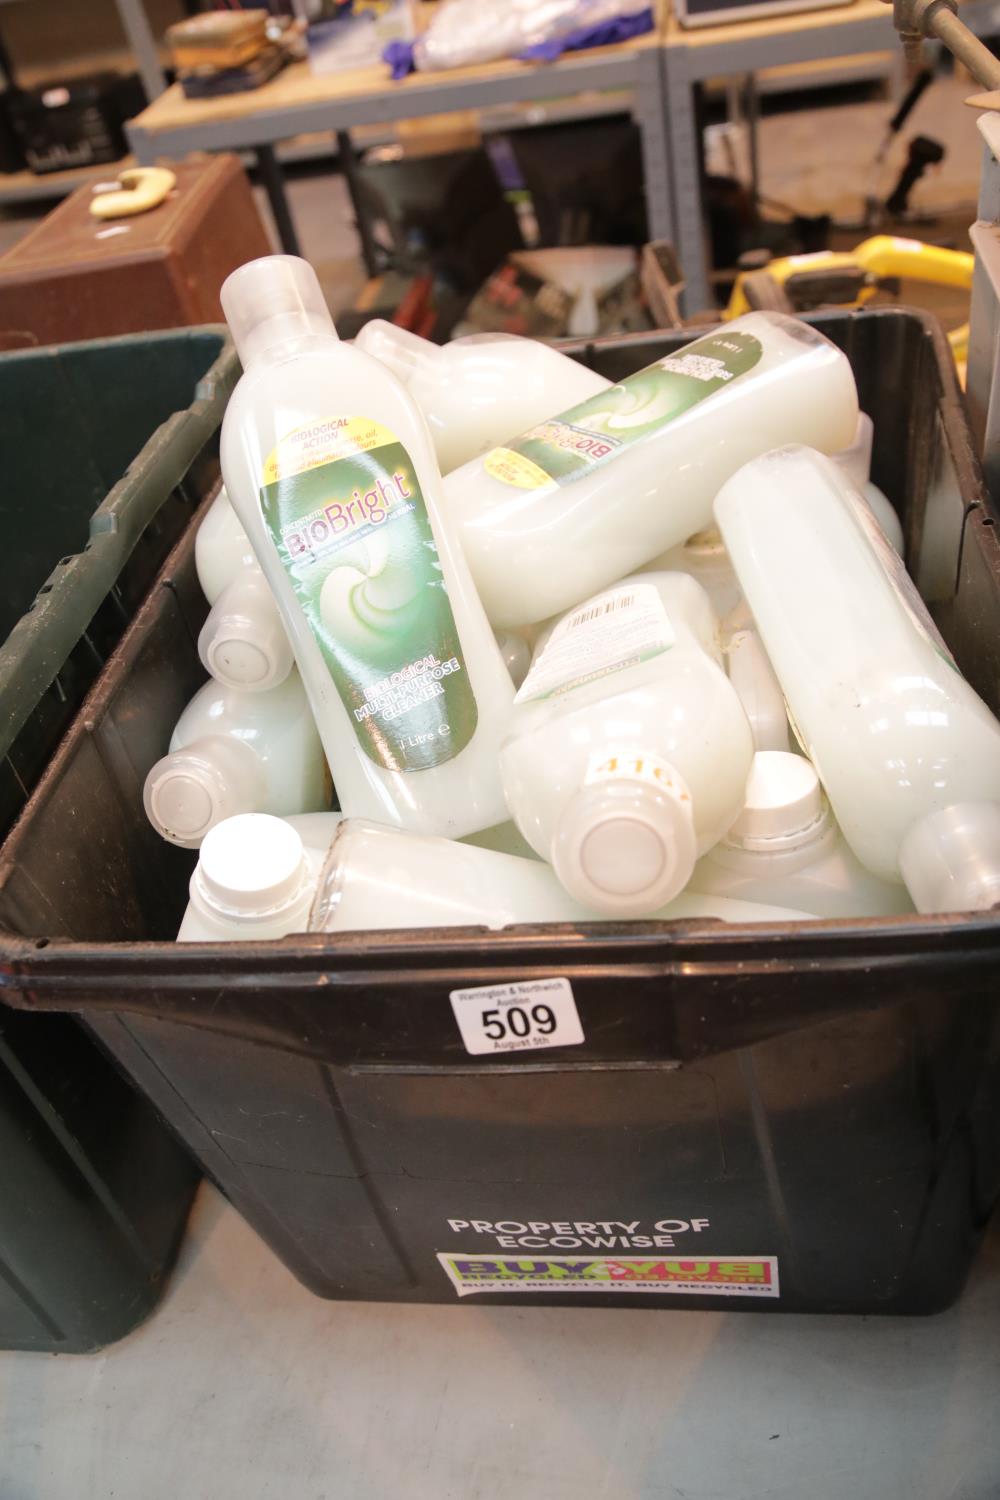 Box of Bio Bright Cleaner (multi purpose) in bottle and spray. This lot is not available for in-